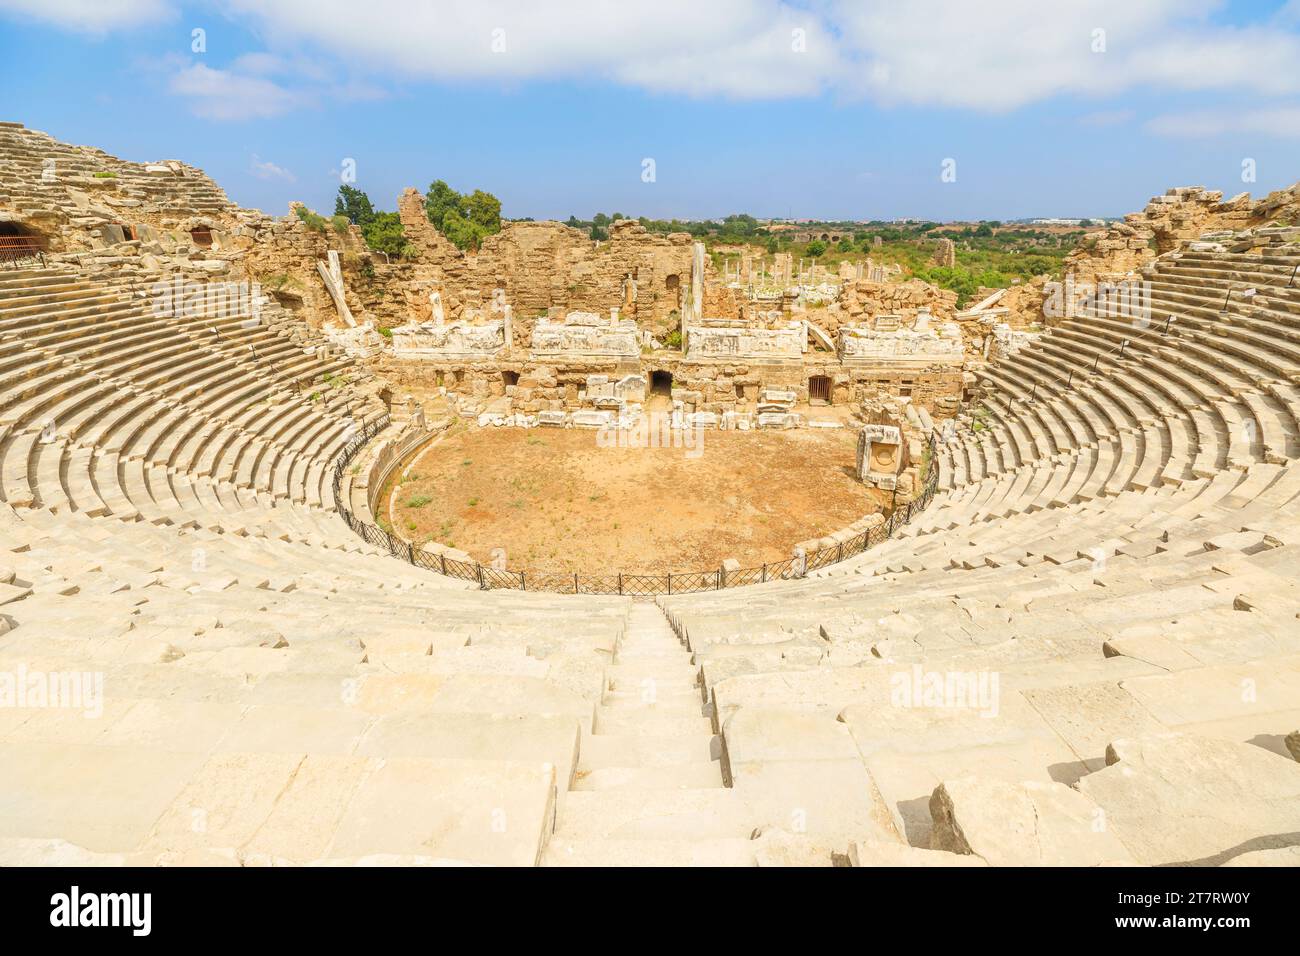 One of most striking features of Side archaeological site in Turkey, is the ancient theater. The theater's backdrop of sea and sky creates a Stock Photo